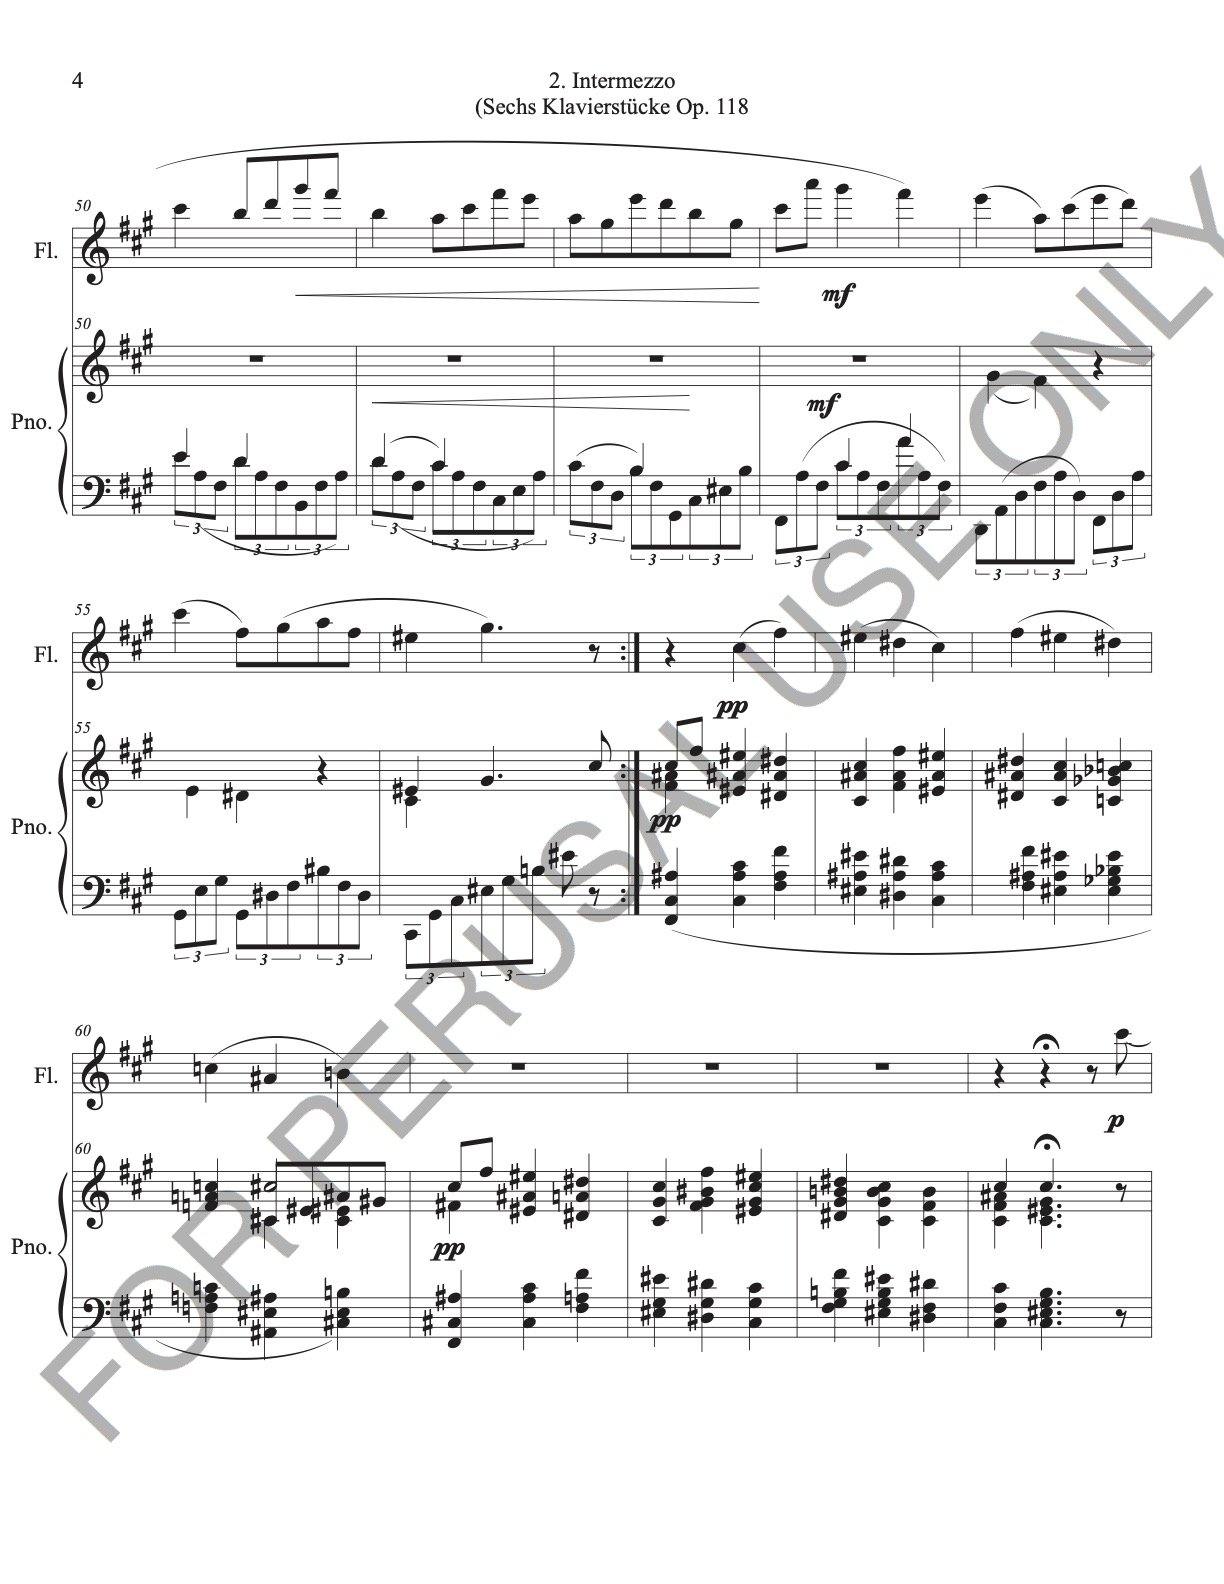 Intermezzo Op. 118 no. 2 by Brahms sheet music for Solo instruments and Piano - ChaipruckMekara